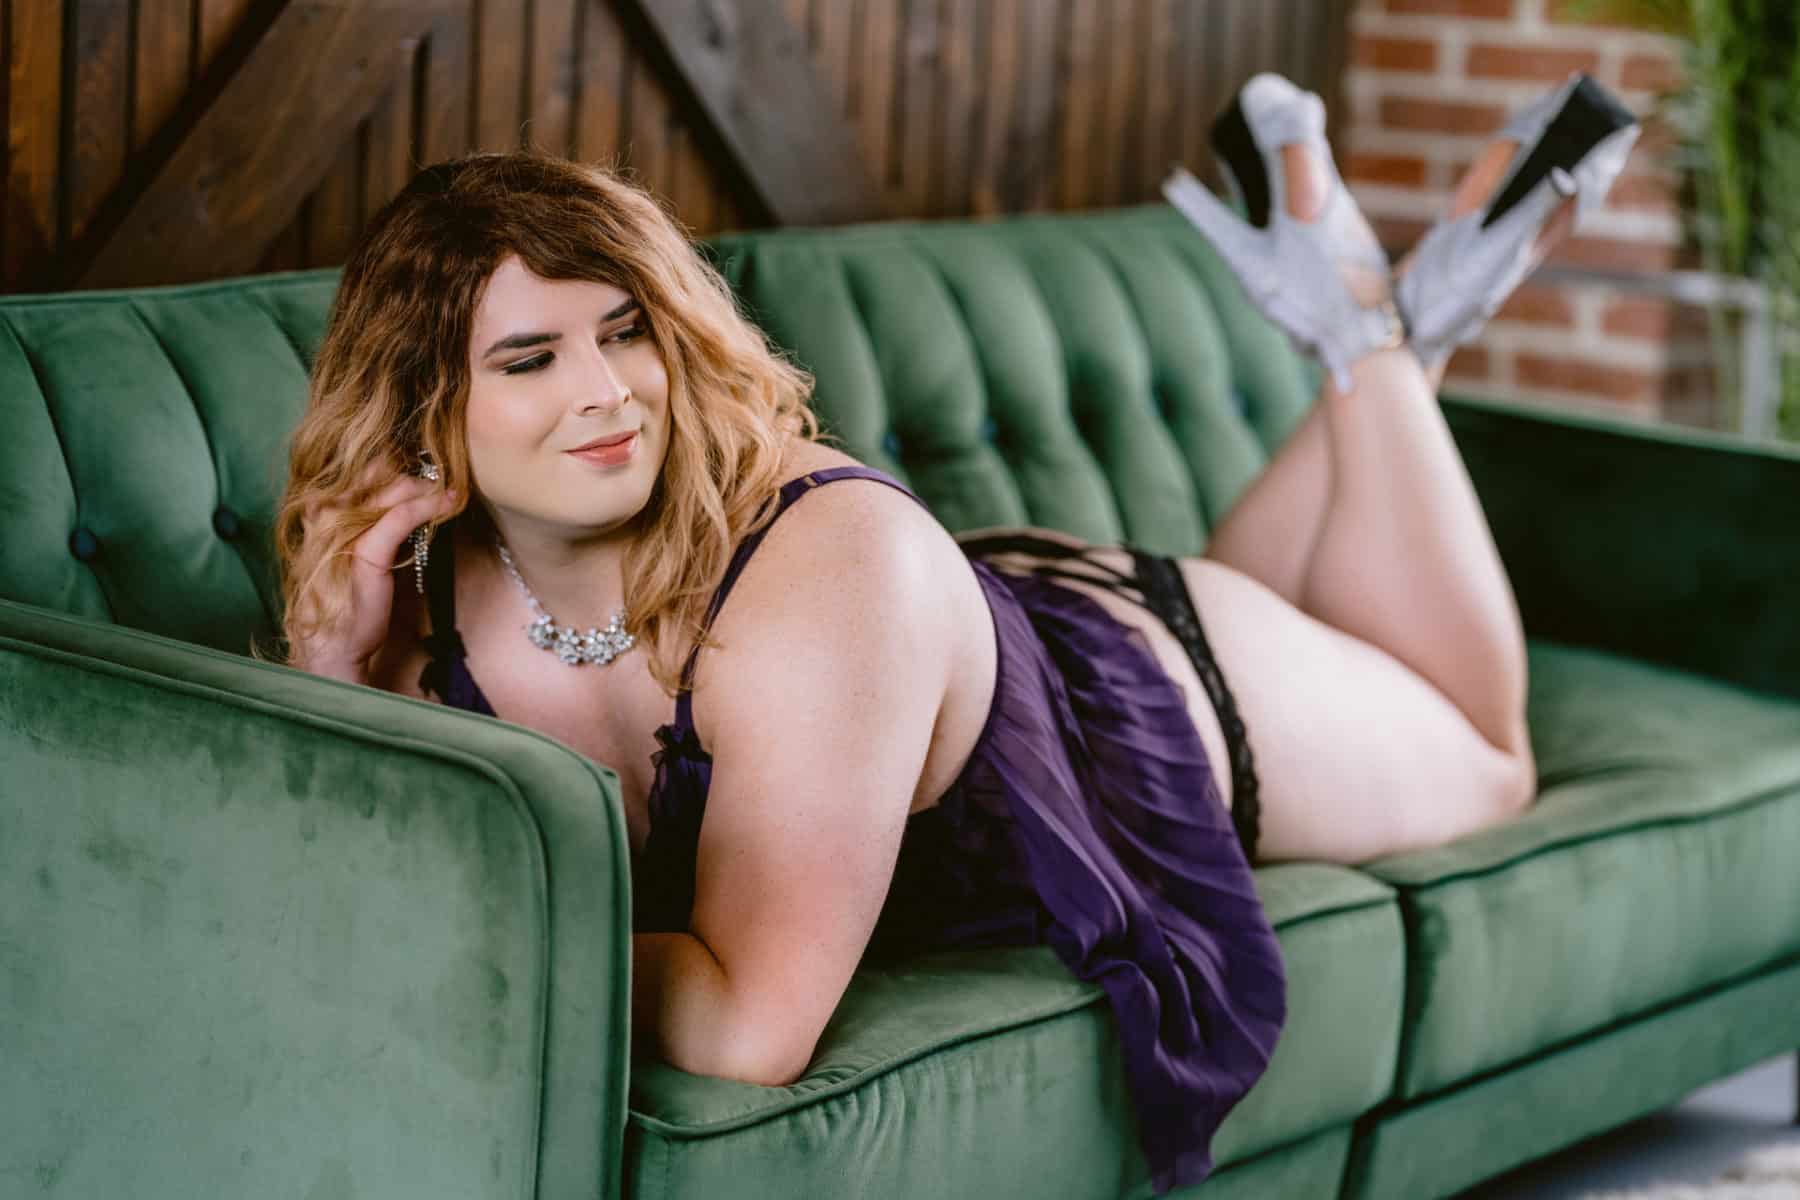 Unleash your true essence with our LGBTQAI+ boudoir photography sessions designed to celebrate every unique aspect of your gender identity. Book now for a transformative experience!